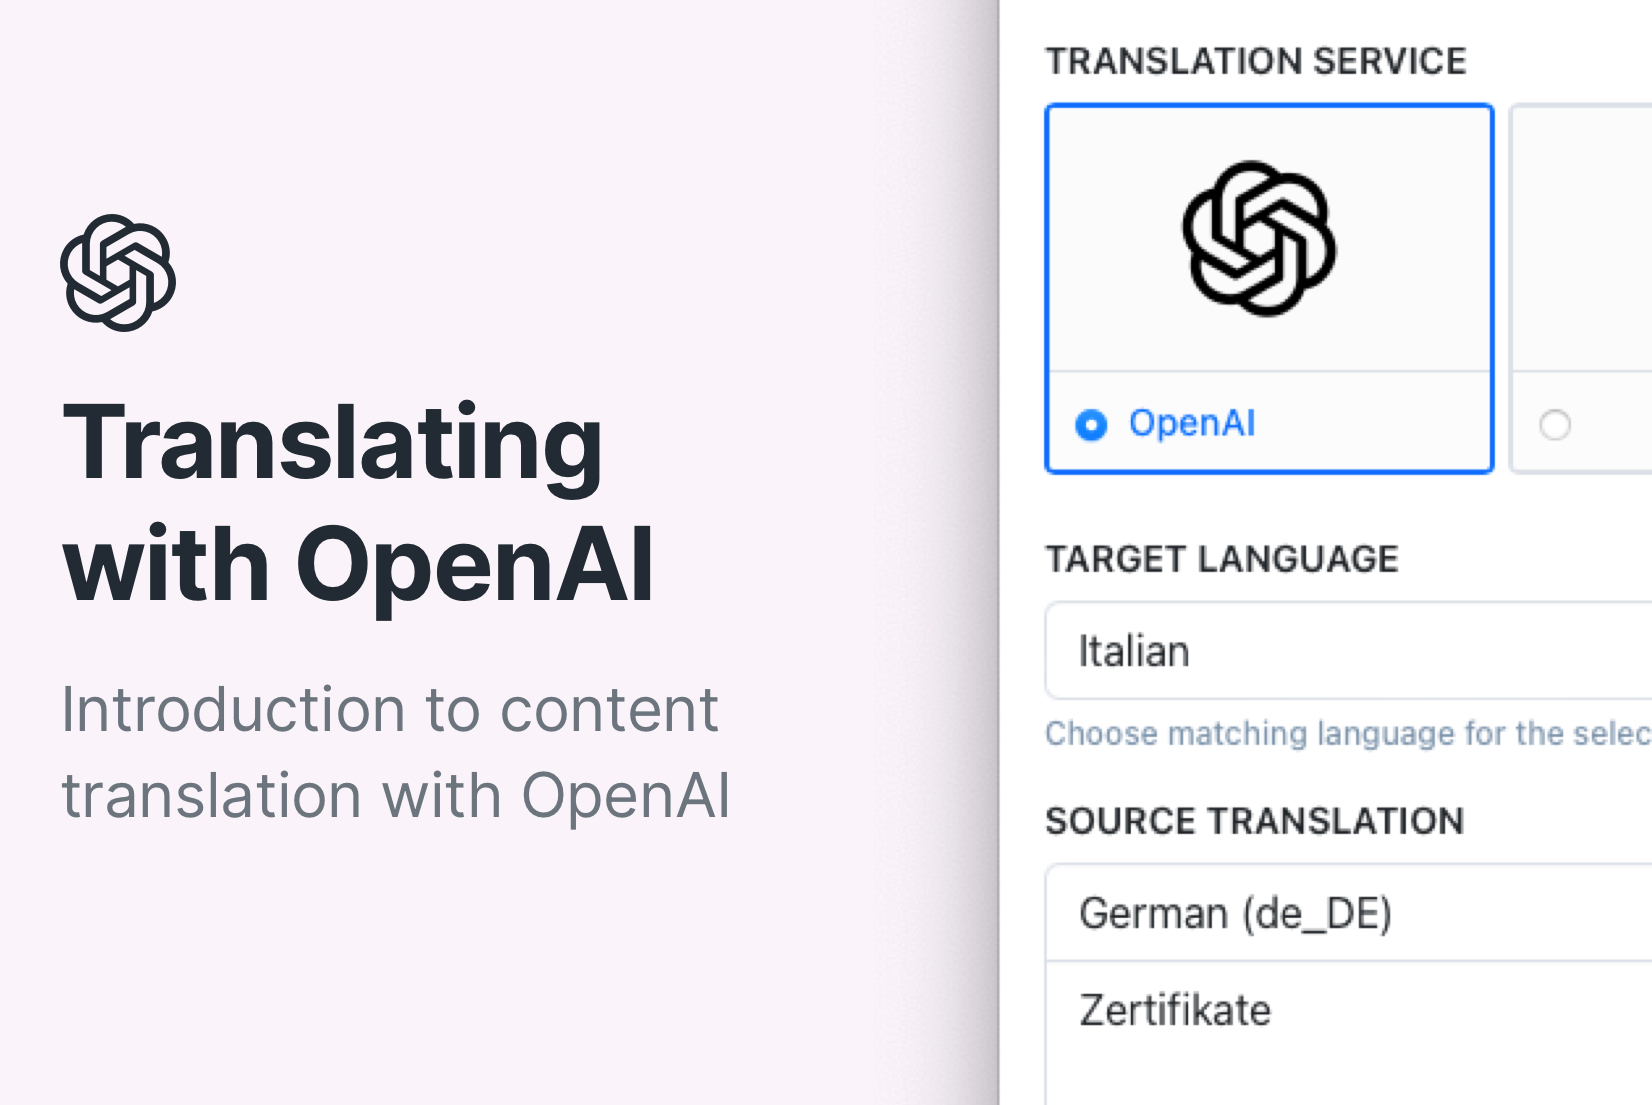 How to translate a website or app using OpenAI?